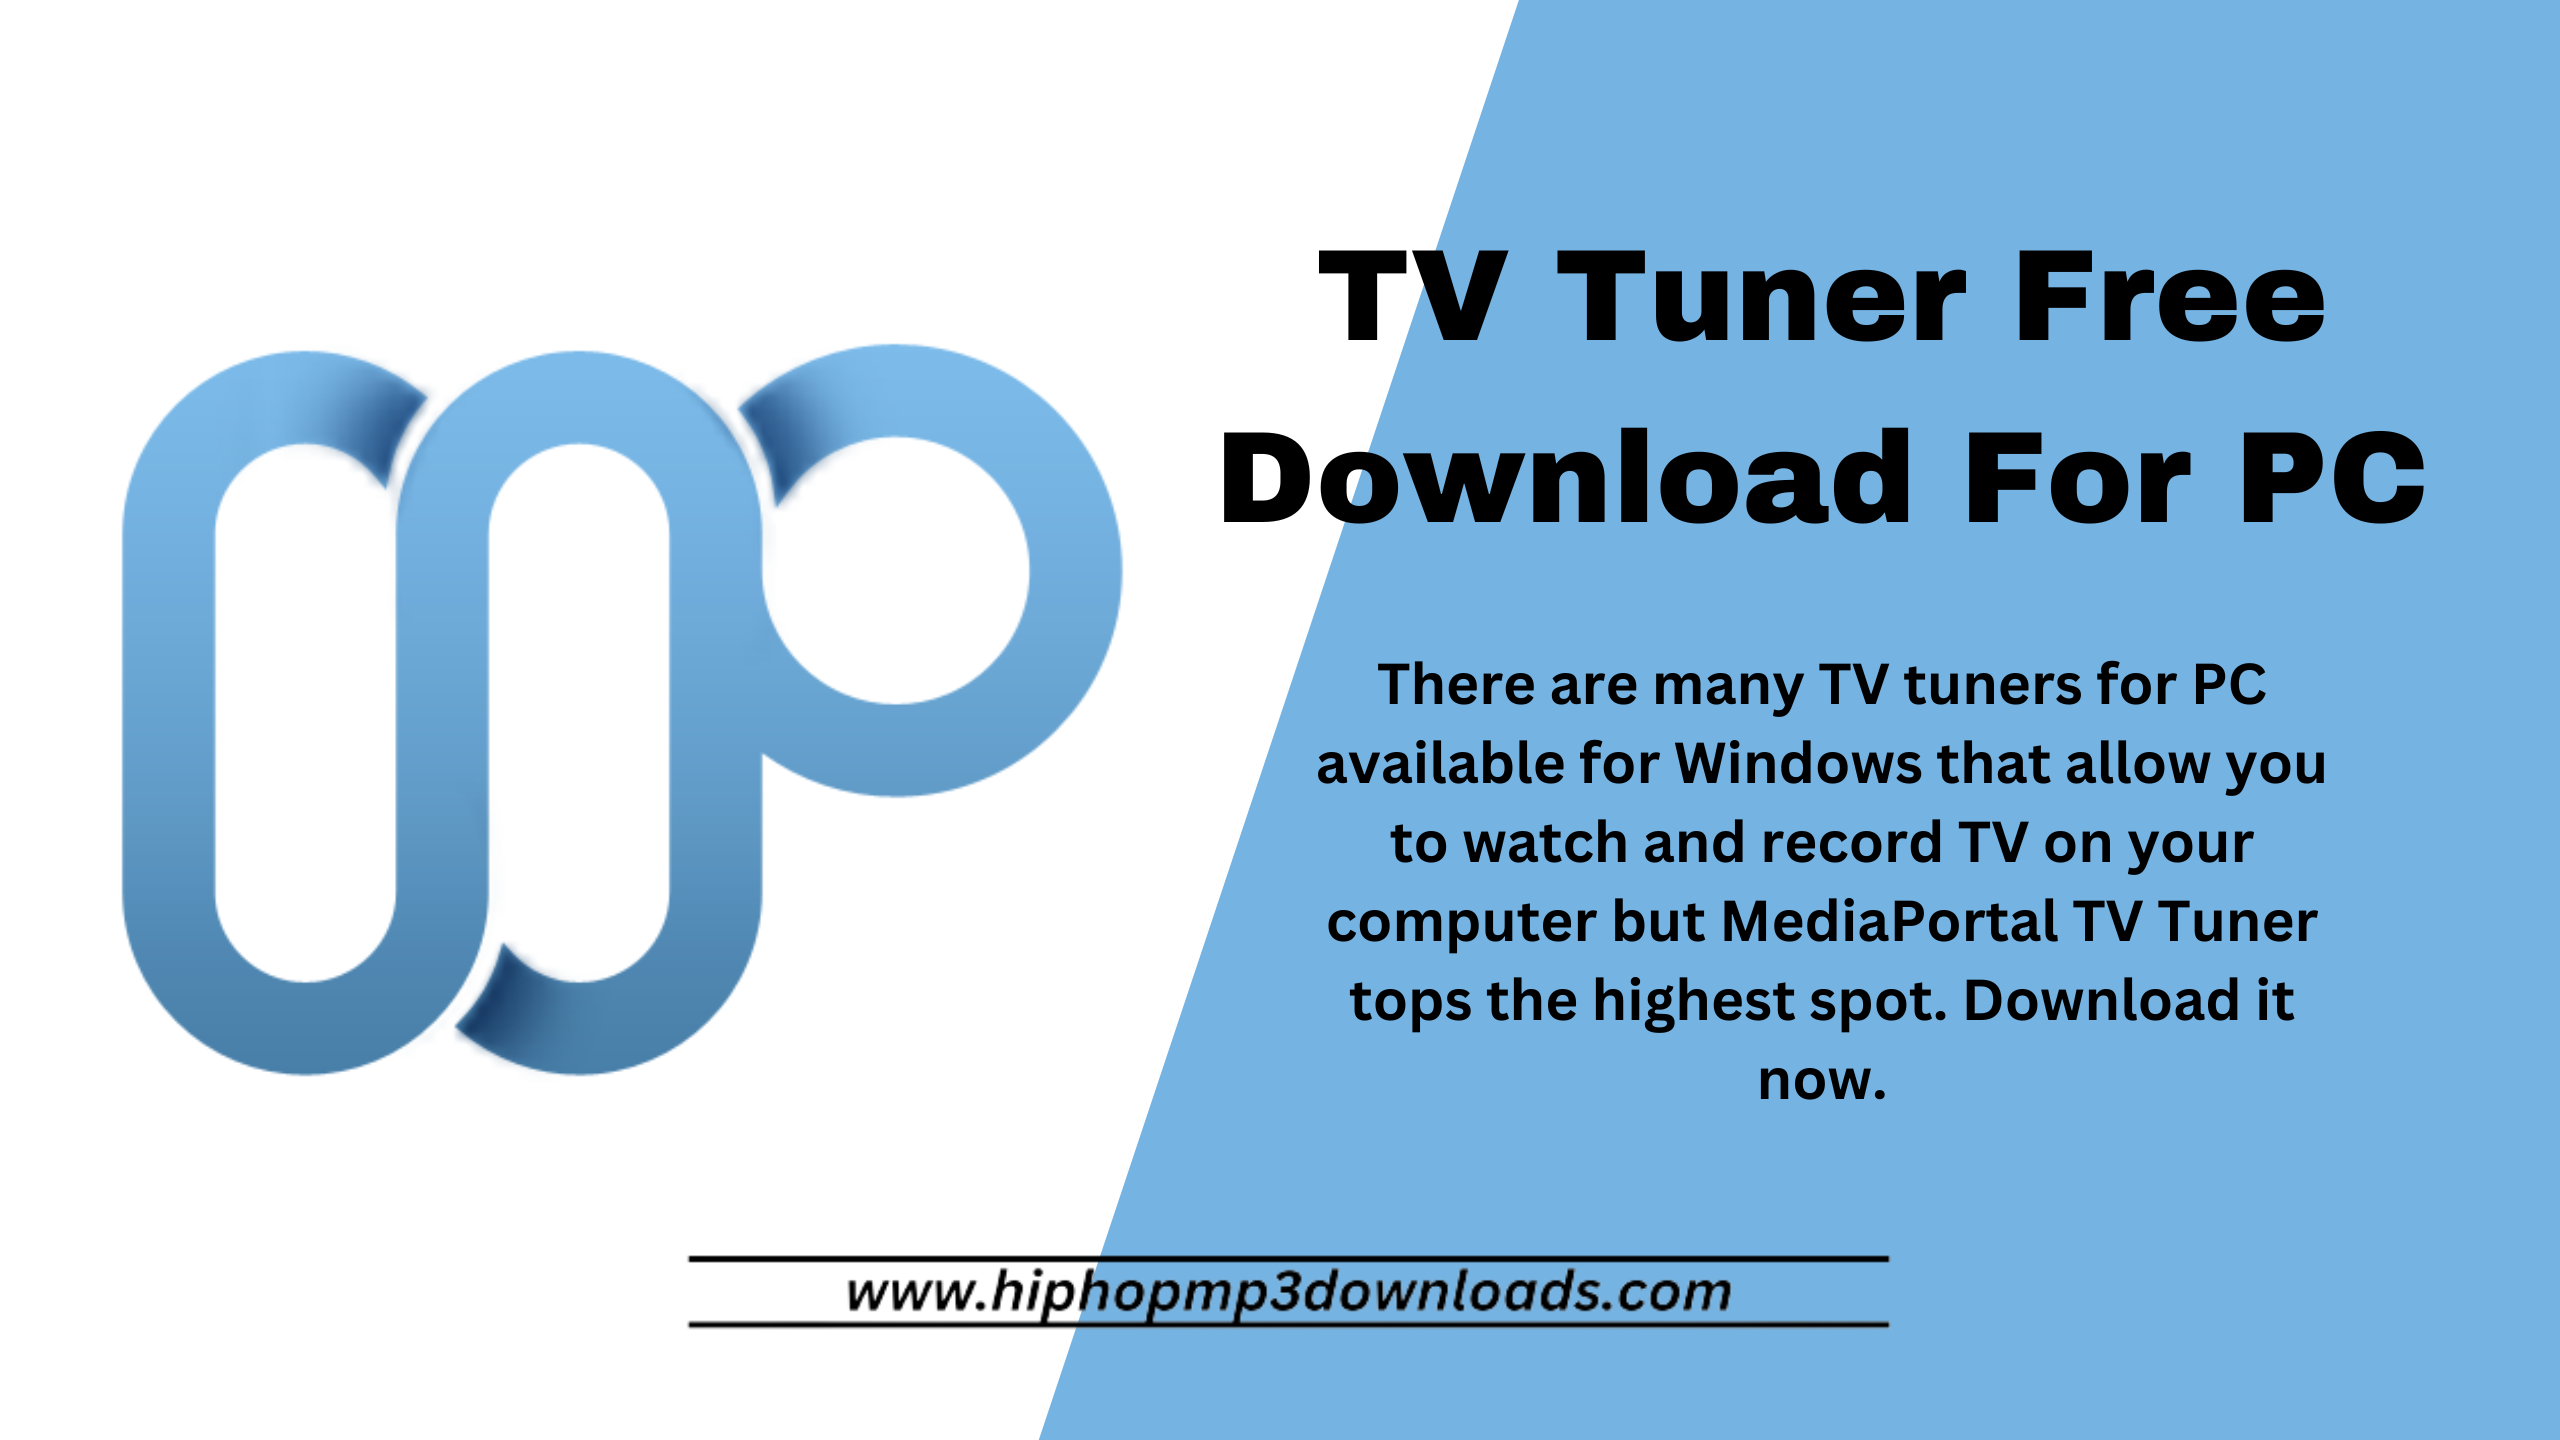 TV Tuner Free Download For PC